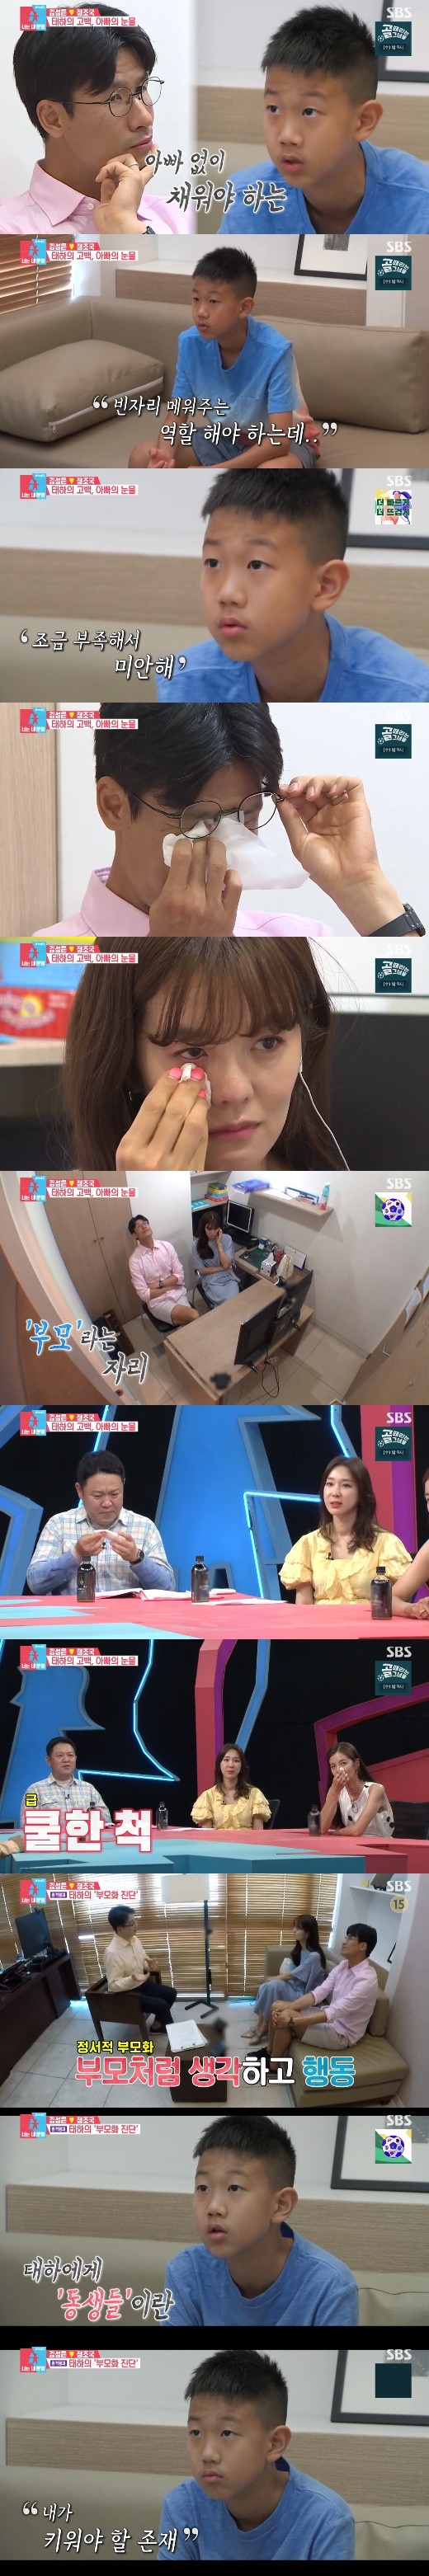 In Same Bed, Different Dreams 2: You Are My Dest - You Are My Destiny, Kim Sung and Kim Tae-ha hats were consulted for psychological counseling.In the 202nd SBS Same Bed, Different Dreams 2: You Are My Dest - You Are My Dest, which was broadcast on the afternoon of the 28th, Kim Sung Eun and Jung Jo-gook, who are consulted by Dr. No Kyu-sik of the mental health medicine major, were portrayed.Kim Tae-ha said, I sleep with my mother now, I am old and I need time alone.As for the reason why I need time alone, When I sleep with my mother when I have stress, I have to listen to everything my mother has to talk about.It is hard to come to football, but there are many times when there is no Father. Kim Sung said, I thought I liked to do it.Kim Tae-ha said, I do not express my feelings to my mother. If I am uncomfortable, I should do it again.I dont think my mother should do it unless its completely uncomfortable. Im twelve years old, so what can I do? Sometimes when it is too hard, I try to think unconditionally about the vacancy without Father every time I get irritated, he said. There are not many families with Father.But we have no Father and my mother has to see three people alone, so I think that the vacancy may be large, so I have to play a role in filling up the vacancy (Fathers) vacancy.I am trying so hard, but there is something that Father can do. I can not do that, so I am sorry that my mother has to do it. Kim Sung said to Dr. No Kyu-sik, I talked about it without any hesitation, but Kim Tae-ha can feel that Mom makes a lot.I can tell my husband that there is no one to do it, so Kim Tae-ha is the only one to do it. Dr. No Kyu-sik said, I am parentified. My child is like a parent. The problem of parentification is not expressing self-emotion.Kim Tae-ha explains that emotional parentification is underway; when this condition gets worse, it becomes helpless, depressed, and derails in adolescence.The first thing is to admit to Kim Tae-ha dependency, and the mother should actually do three child care, So you should not give Kim Tae-ha a thing?Youll be in that conflict, and its important what you do, not for your brother or for your mother, but for your co-worker.For example, it is better to clean the living room than your brothers diaper. Praise points should be different. Its not Thank you for helping your mother.But shell still ask, and therell be an urgent situation. Tell Kim Tae-ha to say no once a day.When Kim Tae-ha asks why shes doing no, she says Im sorry my mom asked.If you tell me you do not want to do anything you do not want to do, I will ask you comfortably. Kim Sung also said, I am angry with my children. If they are wrong, it is my responsibility. I have no responsibility for the groom.As the family grows, I keep seeing holes.Because it is my responsibility, I think I have not been able to do it all, so I feel disappointed about myself and I want to do better, so I get more angry with my children.I can not even be angry a little, so I do not want to be so big that I want to do this. Dr. Noh Kyu-sik said, This is Burn Out.It was a stress that I could endure before, but this is getting more and more difficult, he said. After Burn Out recognition, adjustment is needed.I have to decide what to give up while living. 